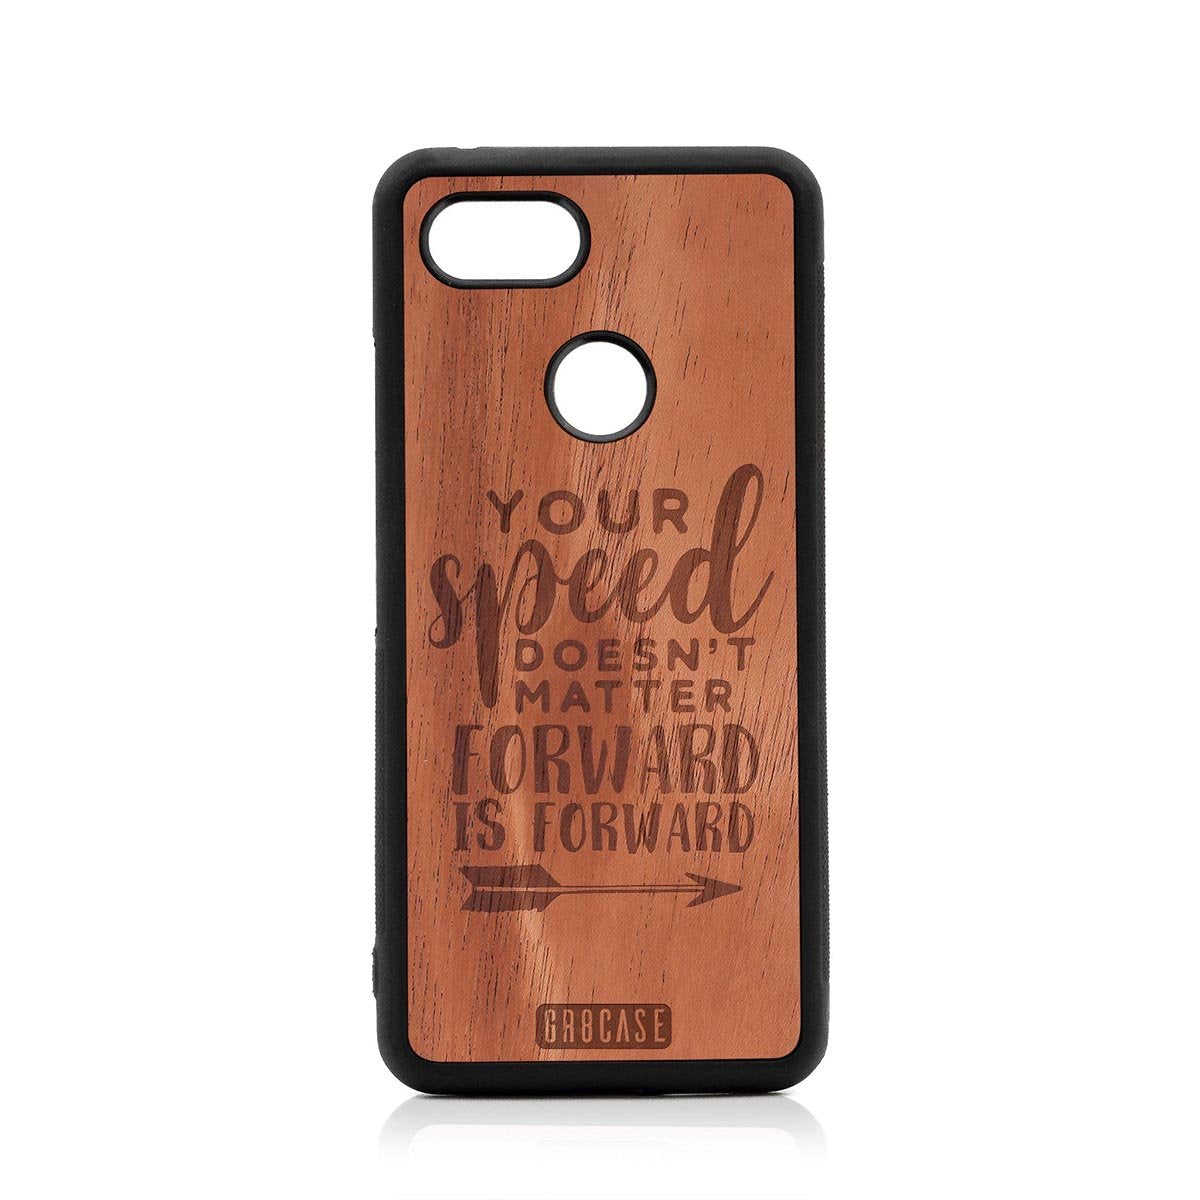 Your Speed Doesn't Matter Forward Is Forward Design Wood Case Google Pixel 3